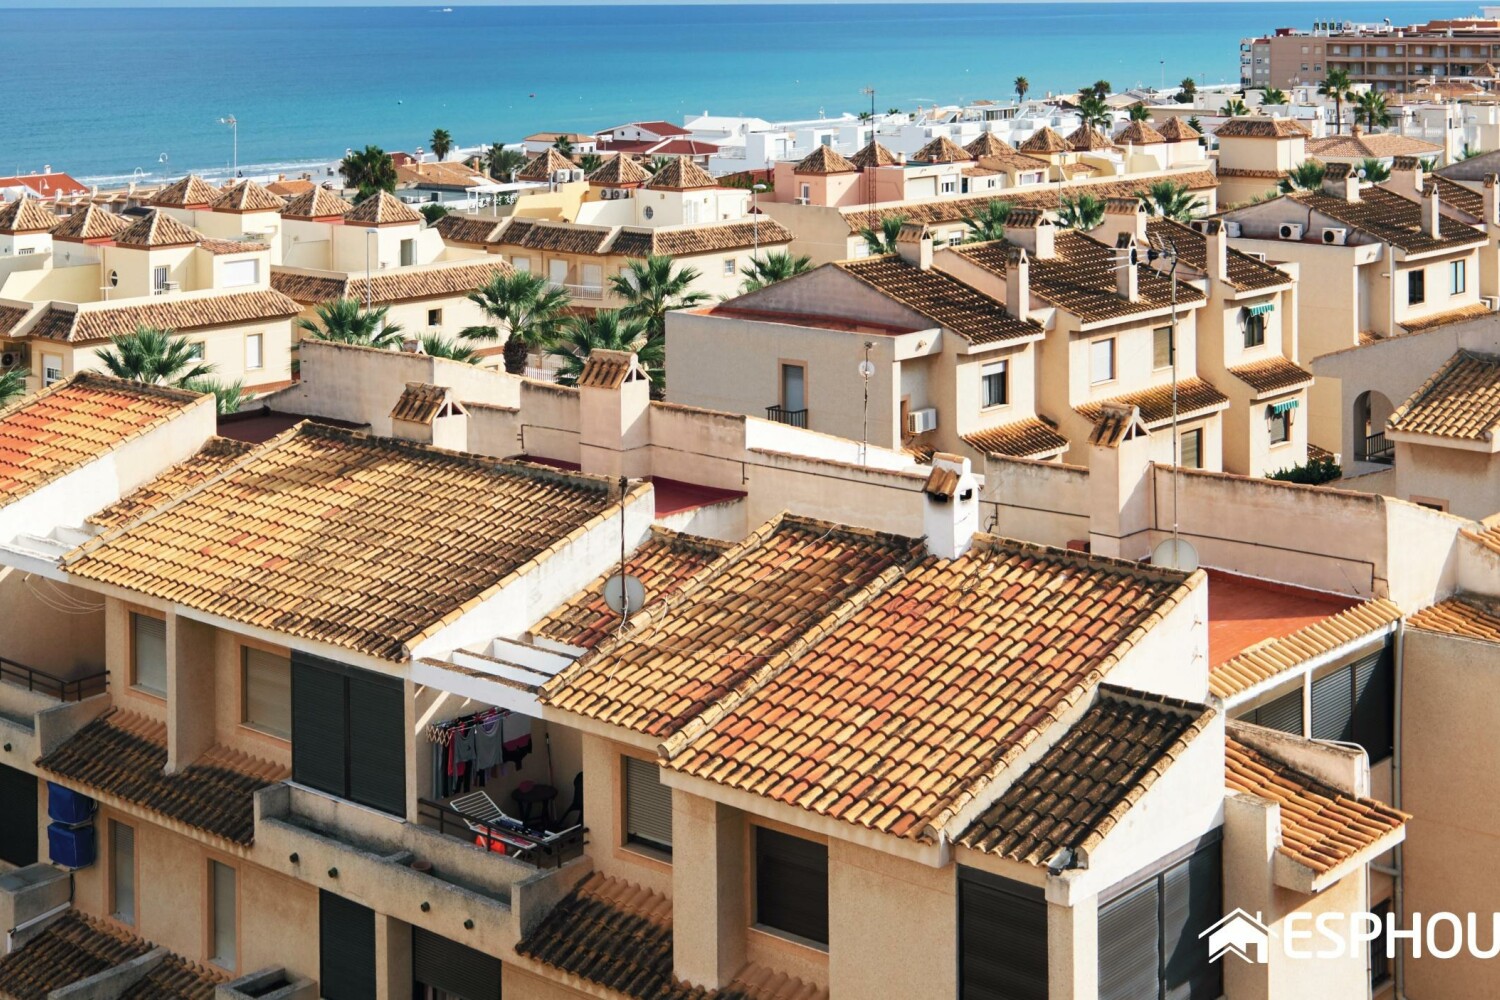 Housing on the Costa Blanca will continue to be a good investment in 2023